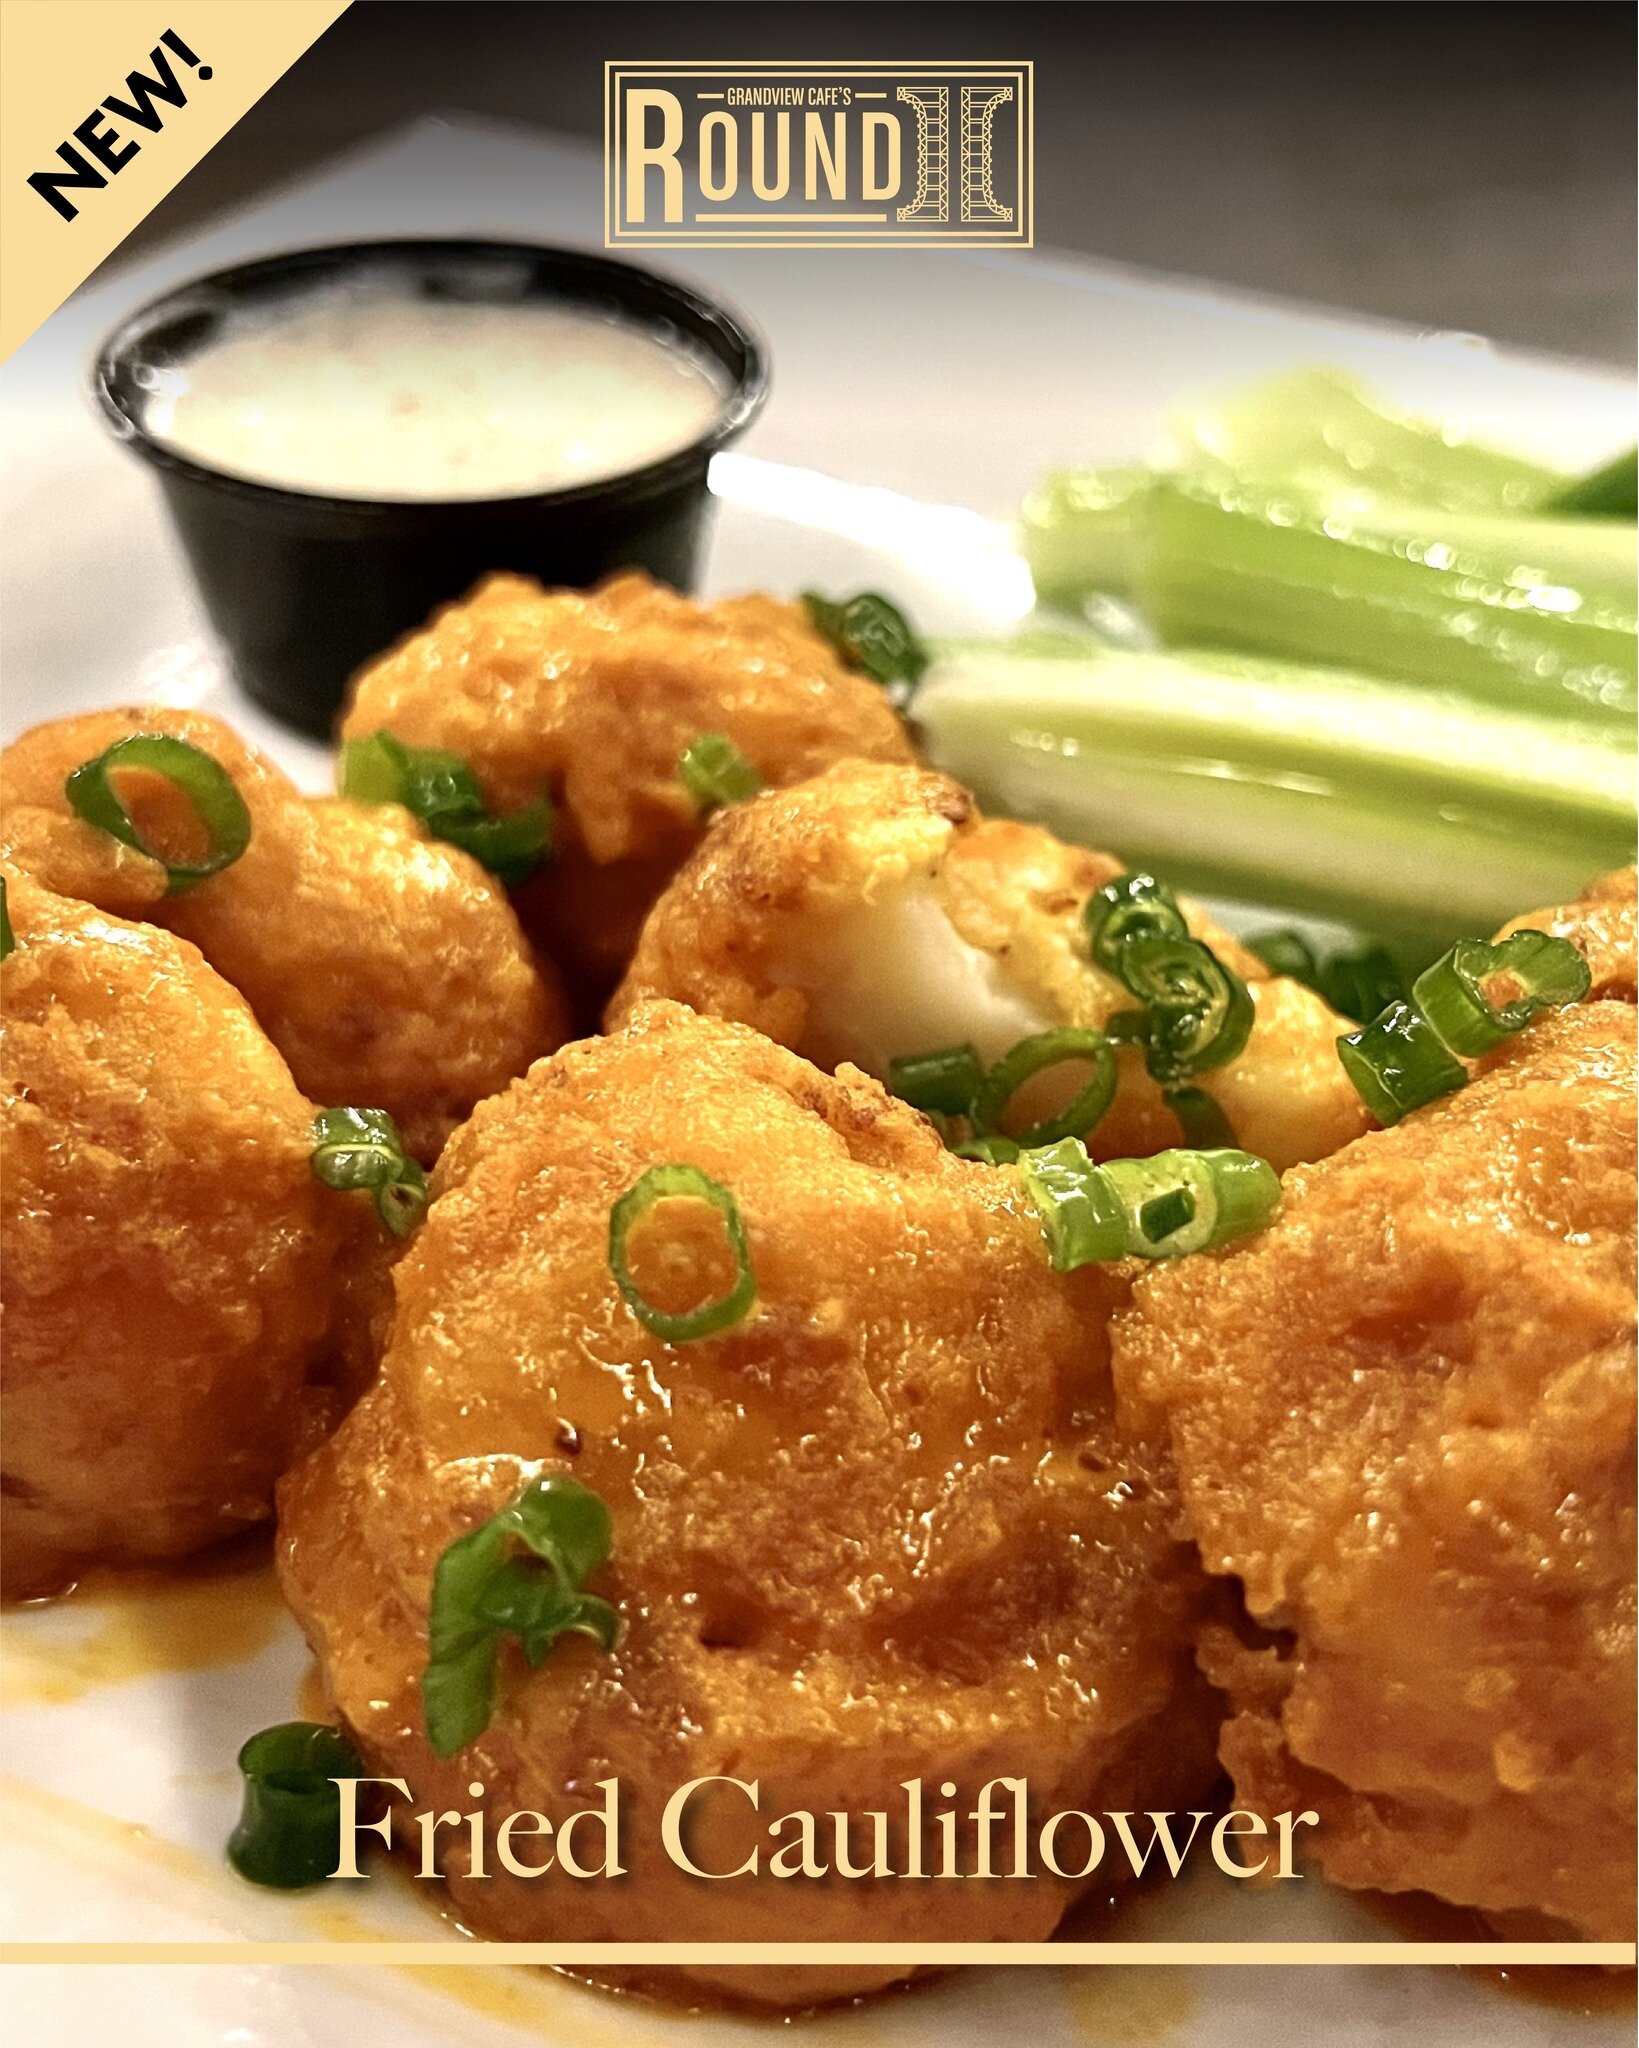 NEW: FRIED CAULIFLOWER | Our crispy fried cauliflower features IPA battered cauliflower bites served with celery and blue cheese or ranch &amp; your choice of sauce; naked, Buffalo, white BBQ, or orange sriracha glaze - on the side or tossed 

#newme